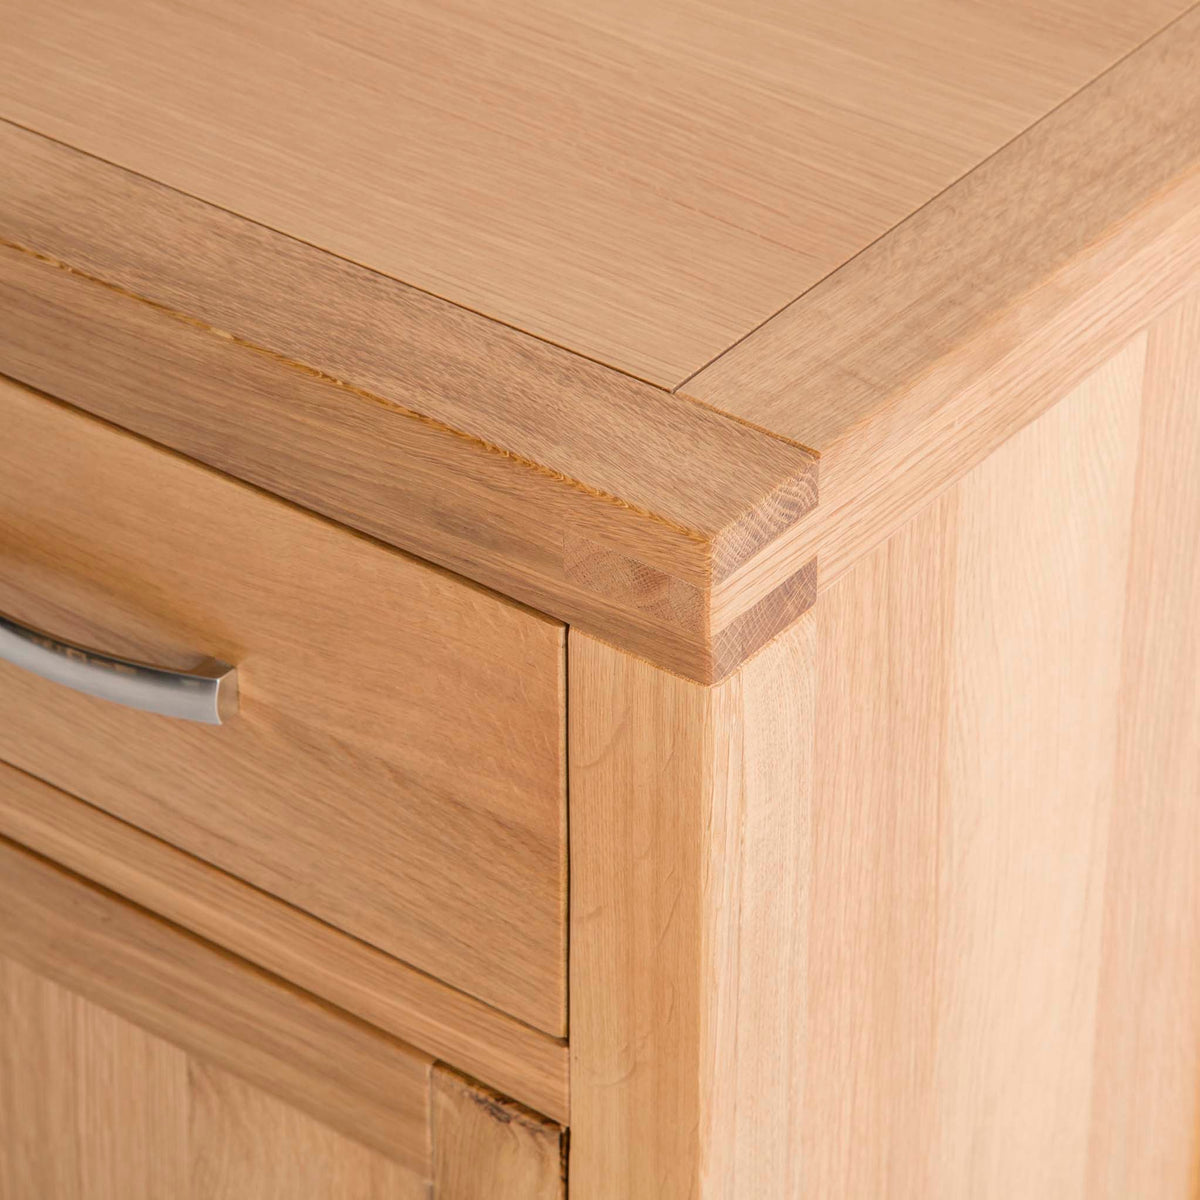  Abbey Light Oak Small Sideboard Cabinet  - Close up of top corner